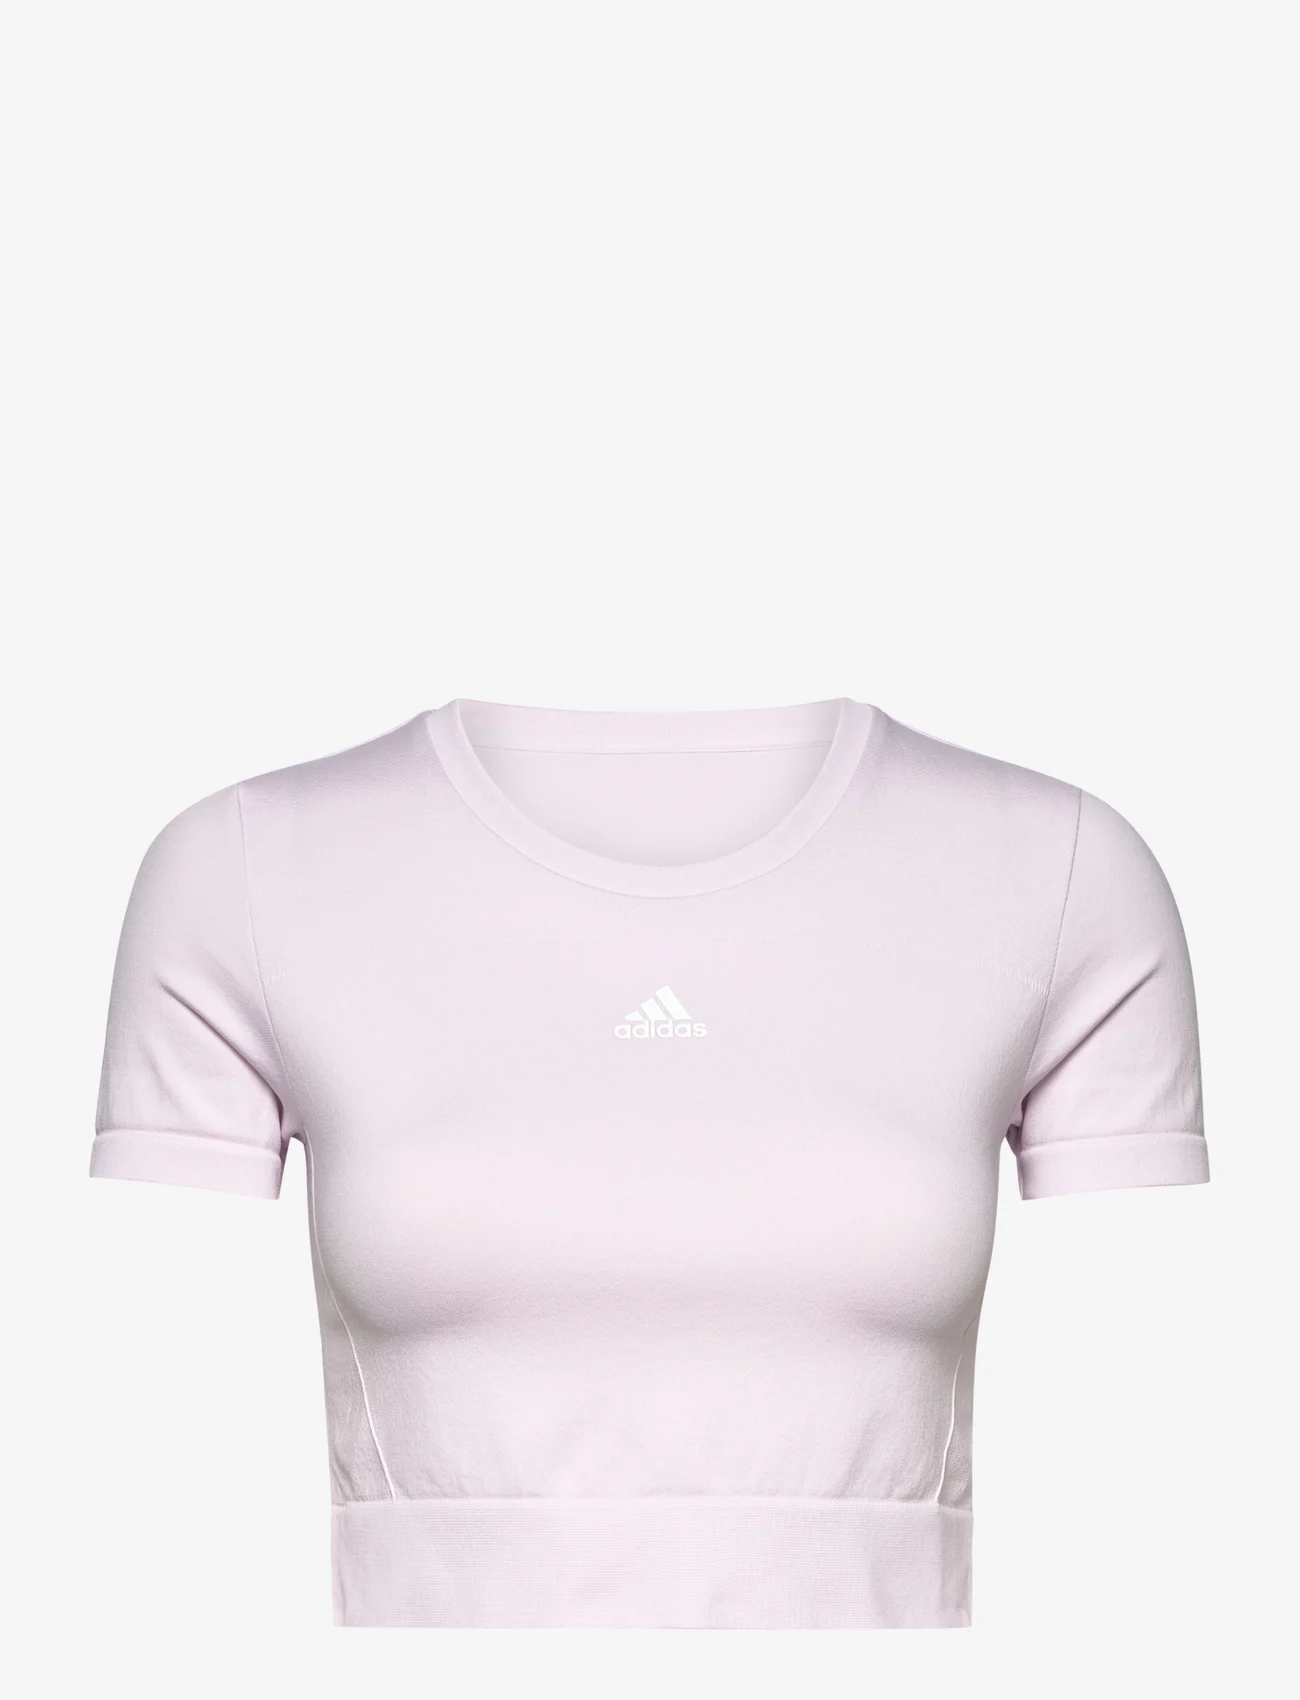 adidas Performance - AEROKNIT Seamless Fitted Cropped Tee W - navel shirts - almpnk/white - 0